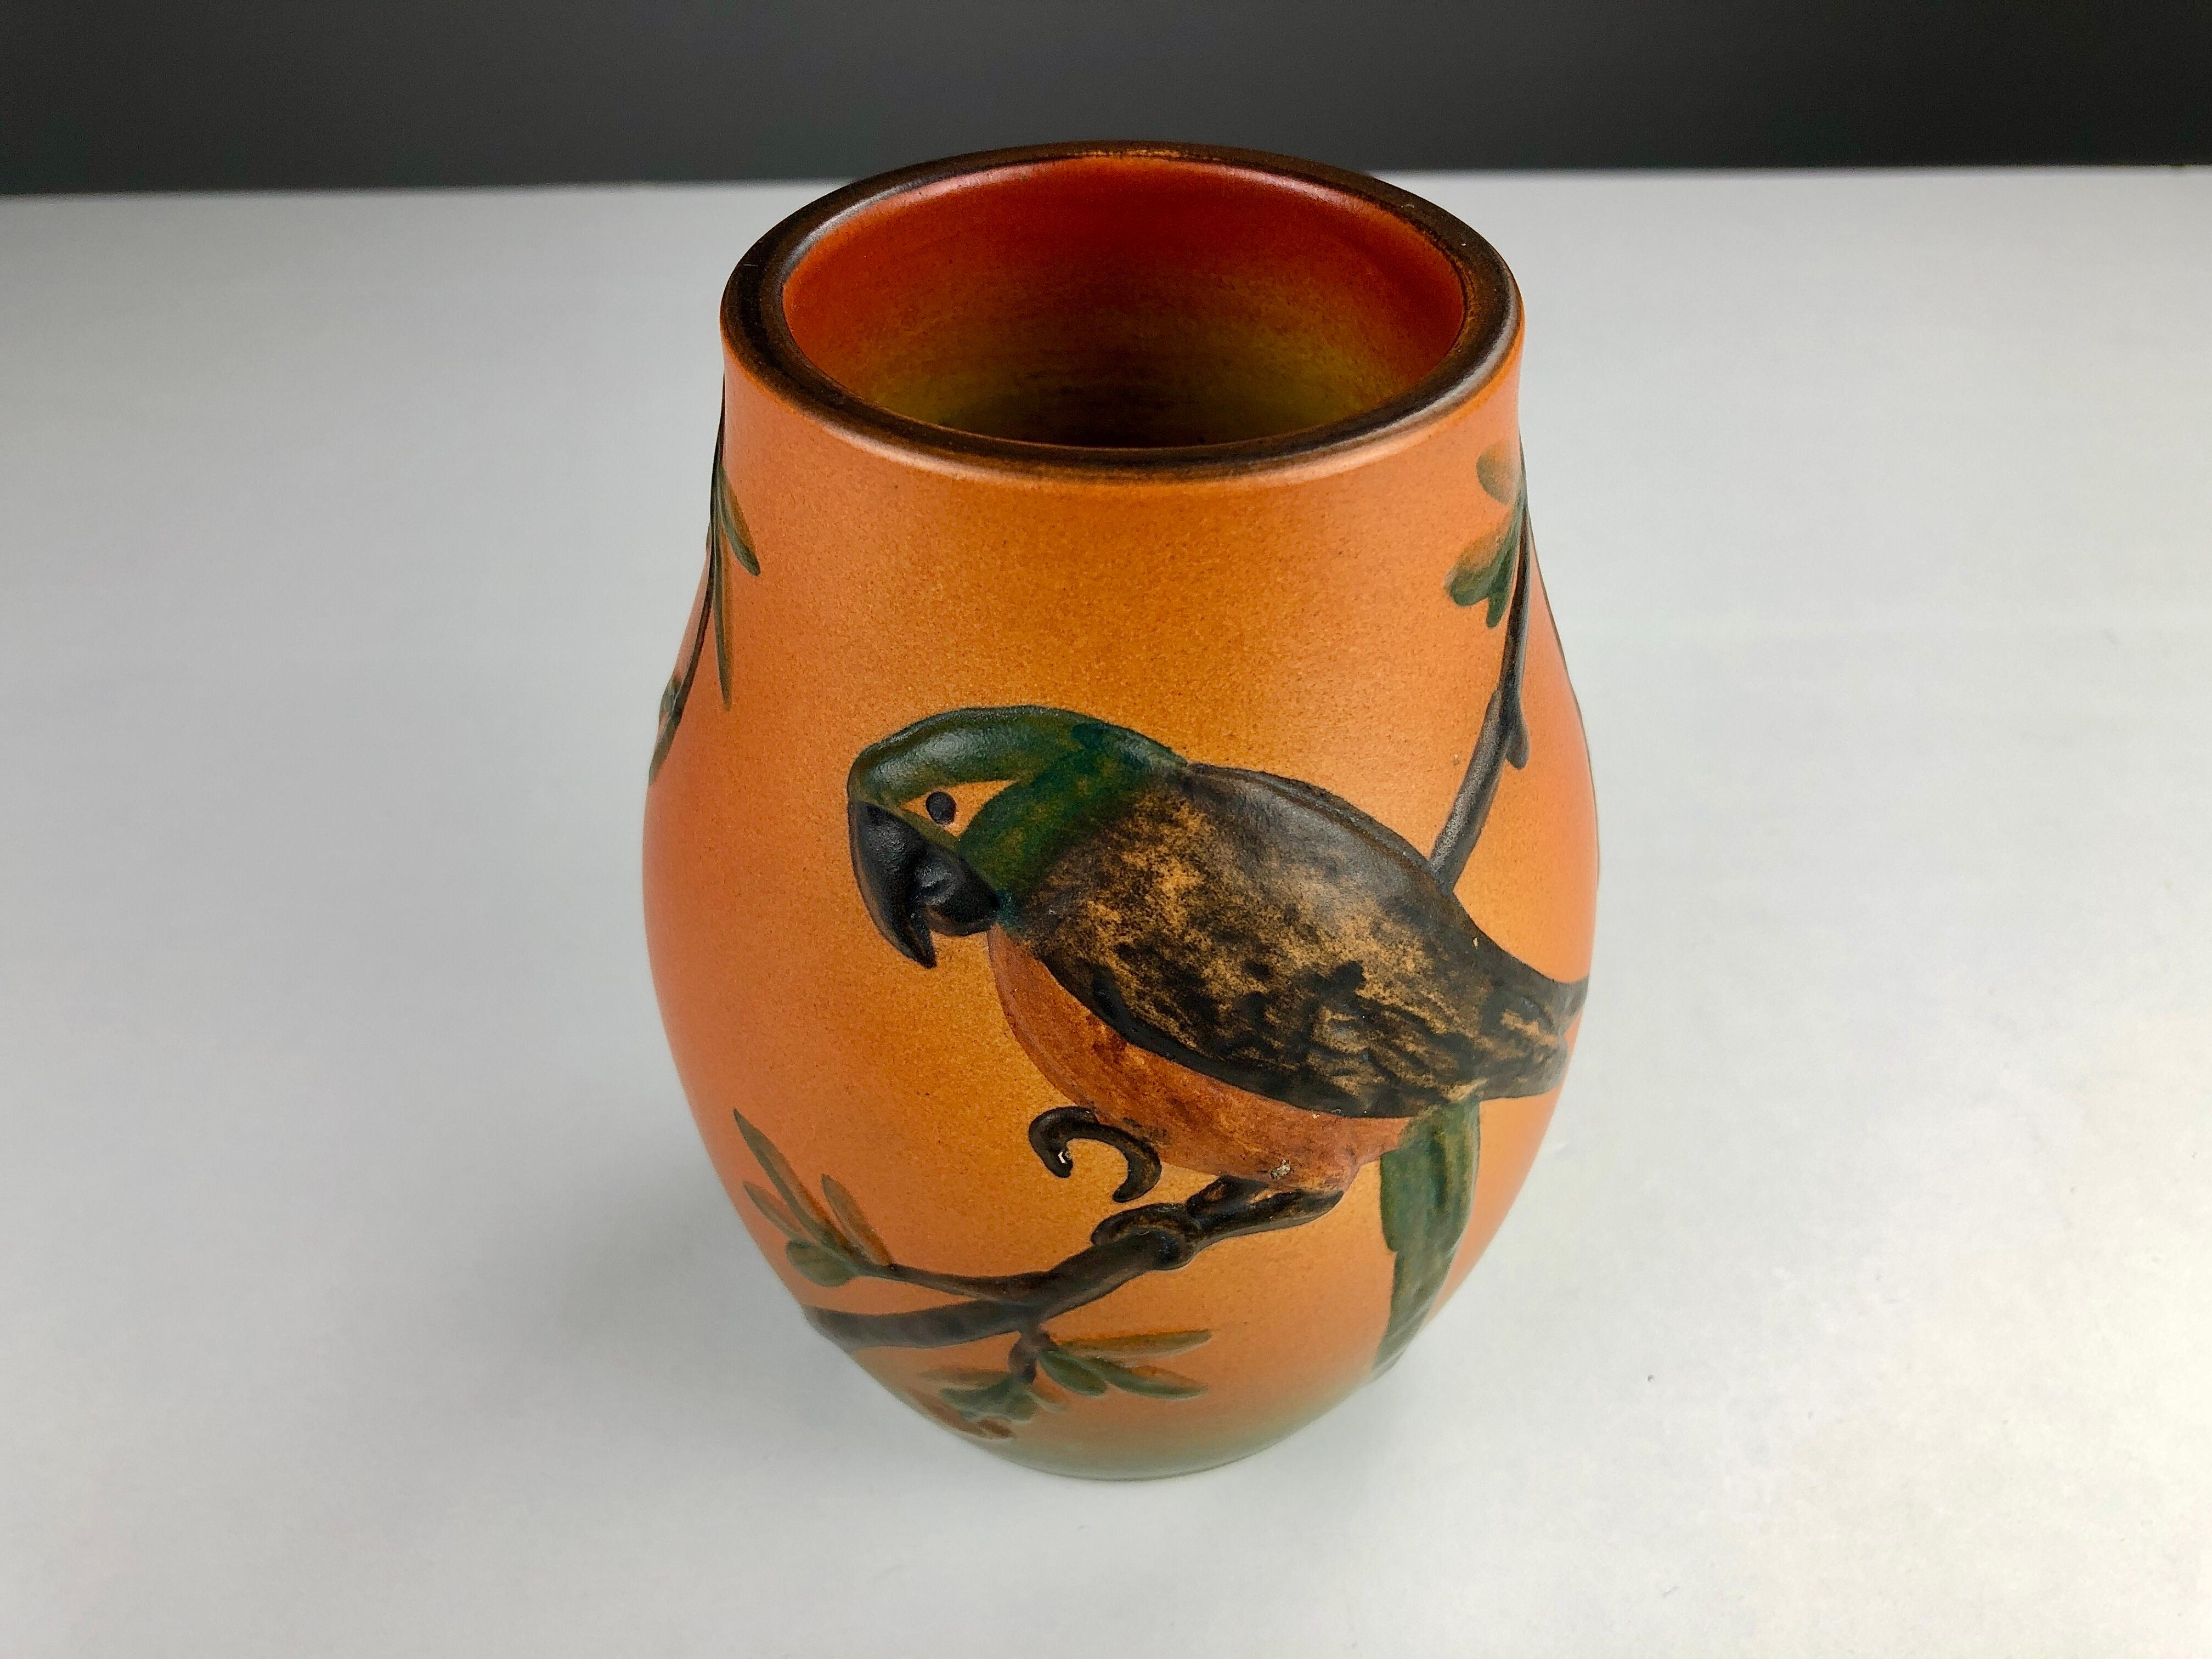 Hand-crafted Danish Art Nouveau flower decorated vase by West in 1927 for P. Ipsens Enke

The art nouveau vase feature very well made lively parrot with branches and leafs is in very good condition.

P. Ipsens Enke (1843 - 1955) was a very